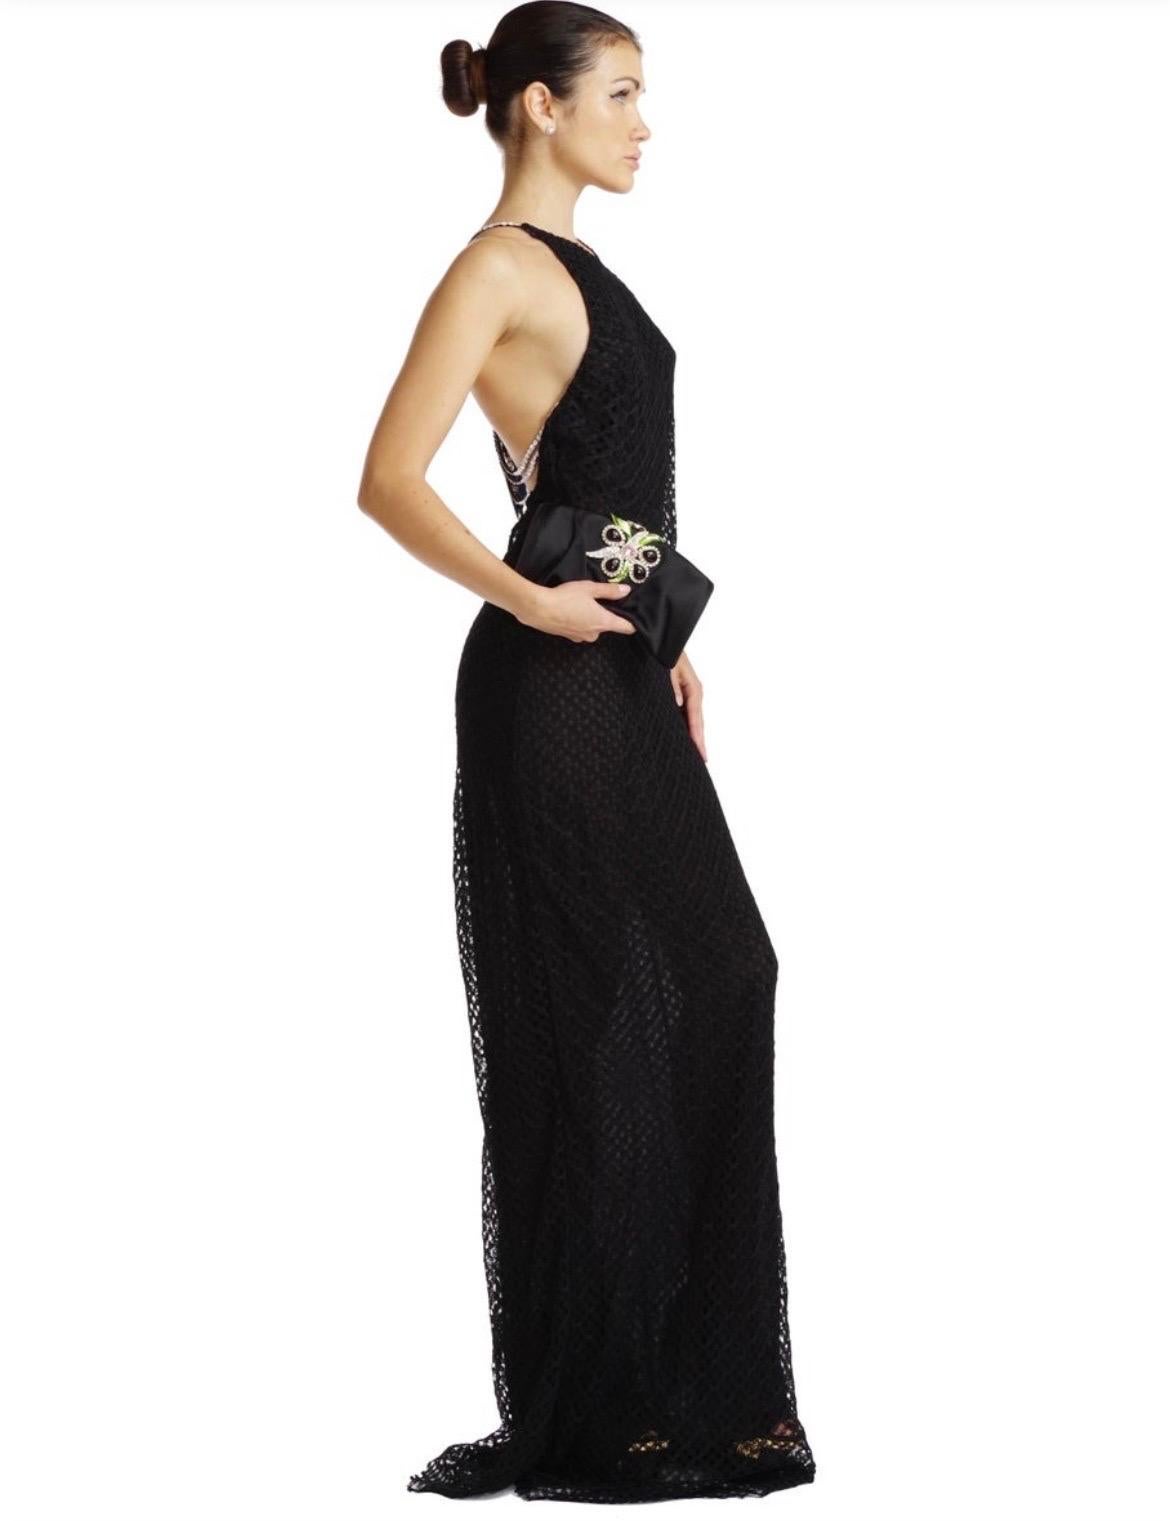 2002 Gianni Versace Couture Vintage Black Gown w/ Crystal Embellished Open Back In New Condition For Sale In Montgomery, TX